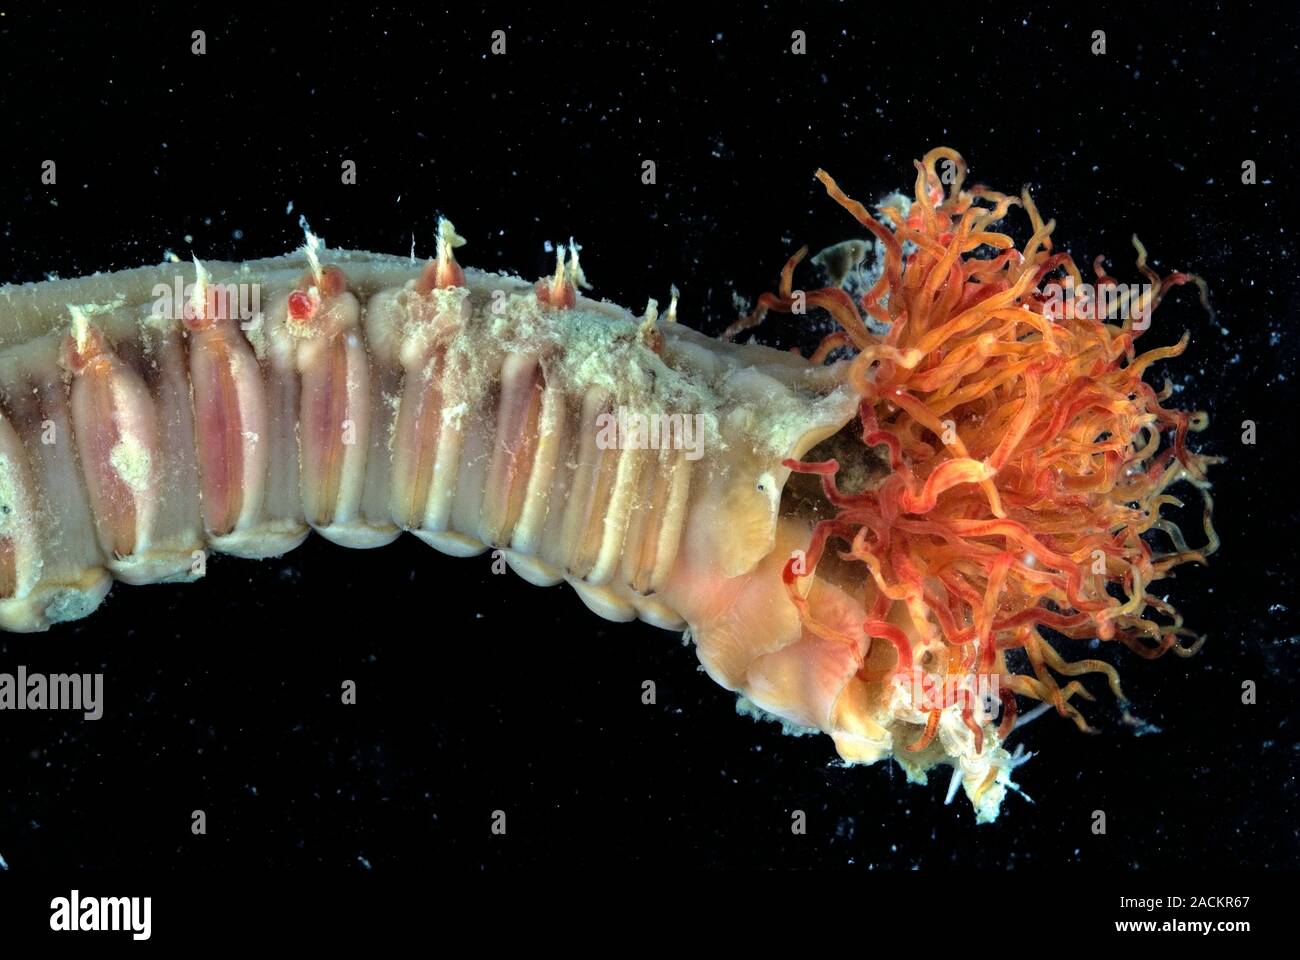 Polychaete marine worm. Close-up of the tentacled head of a tube-dwelling polychaete worm. This species uses its tentacles to feed on phytoplankton du Stock Photo